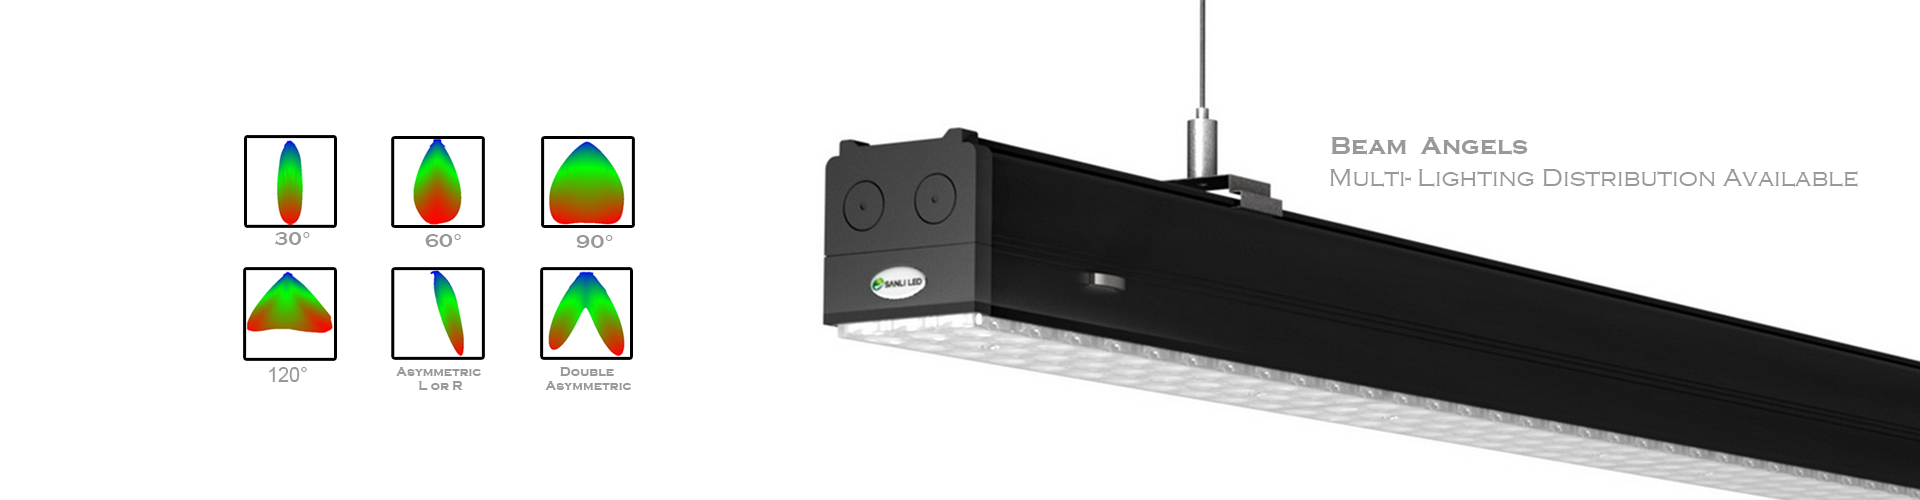 LED Linear Trunk Lighting with 6 beam angels